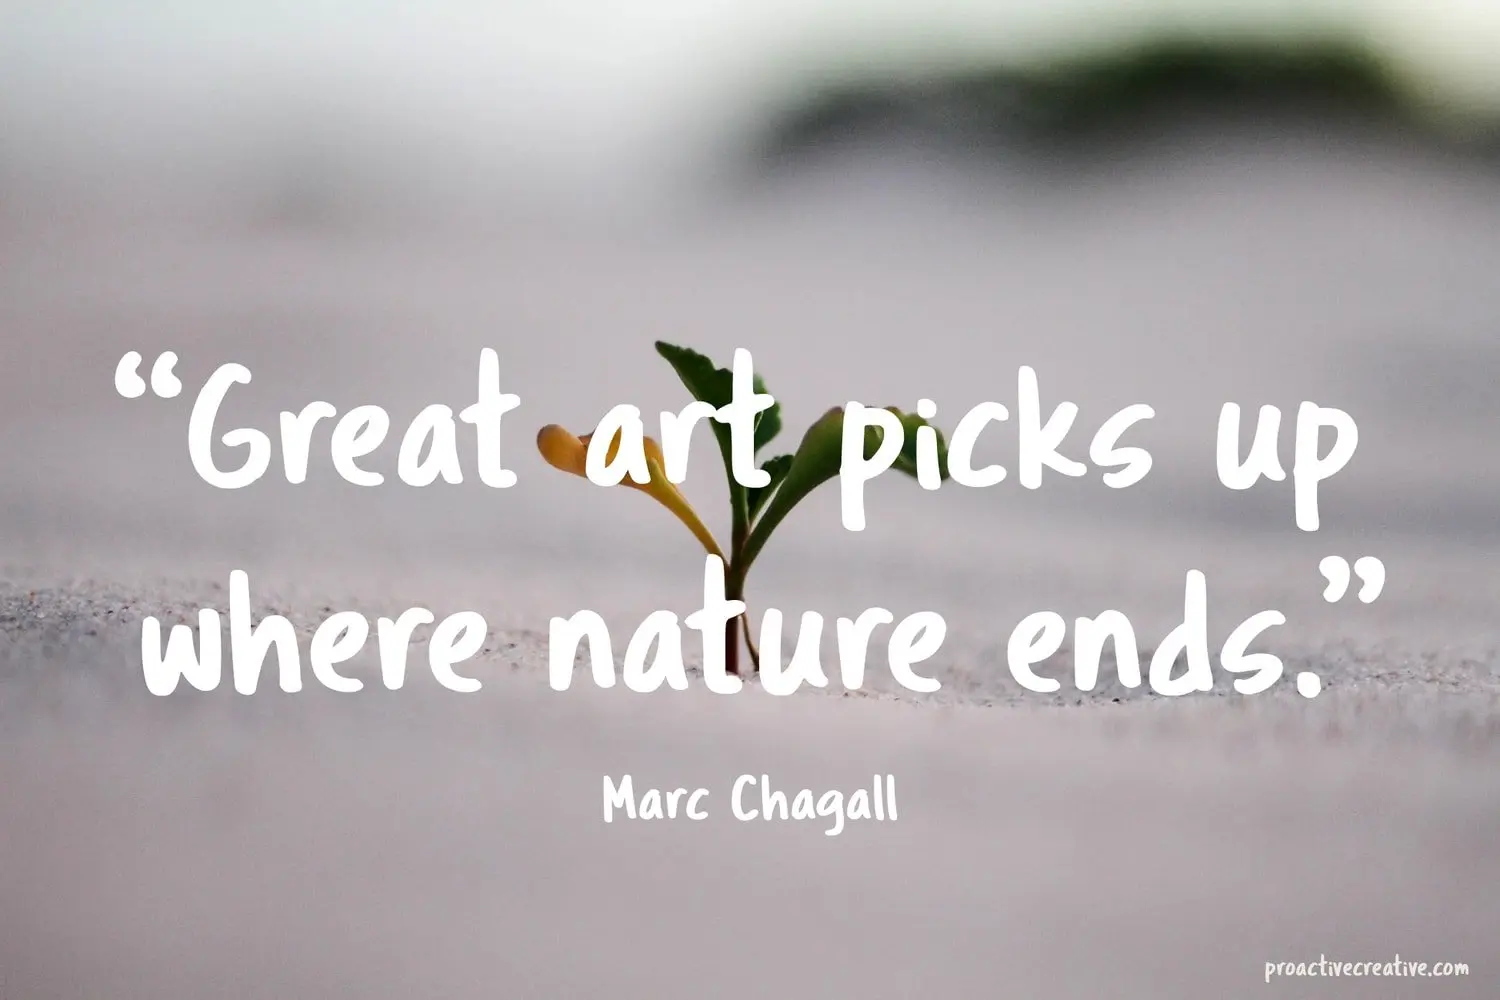 Art and creativity quotes - Marc Chagall